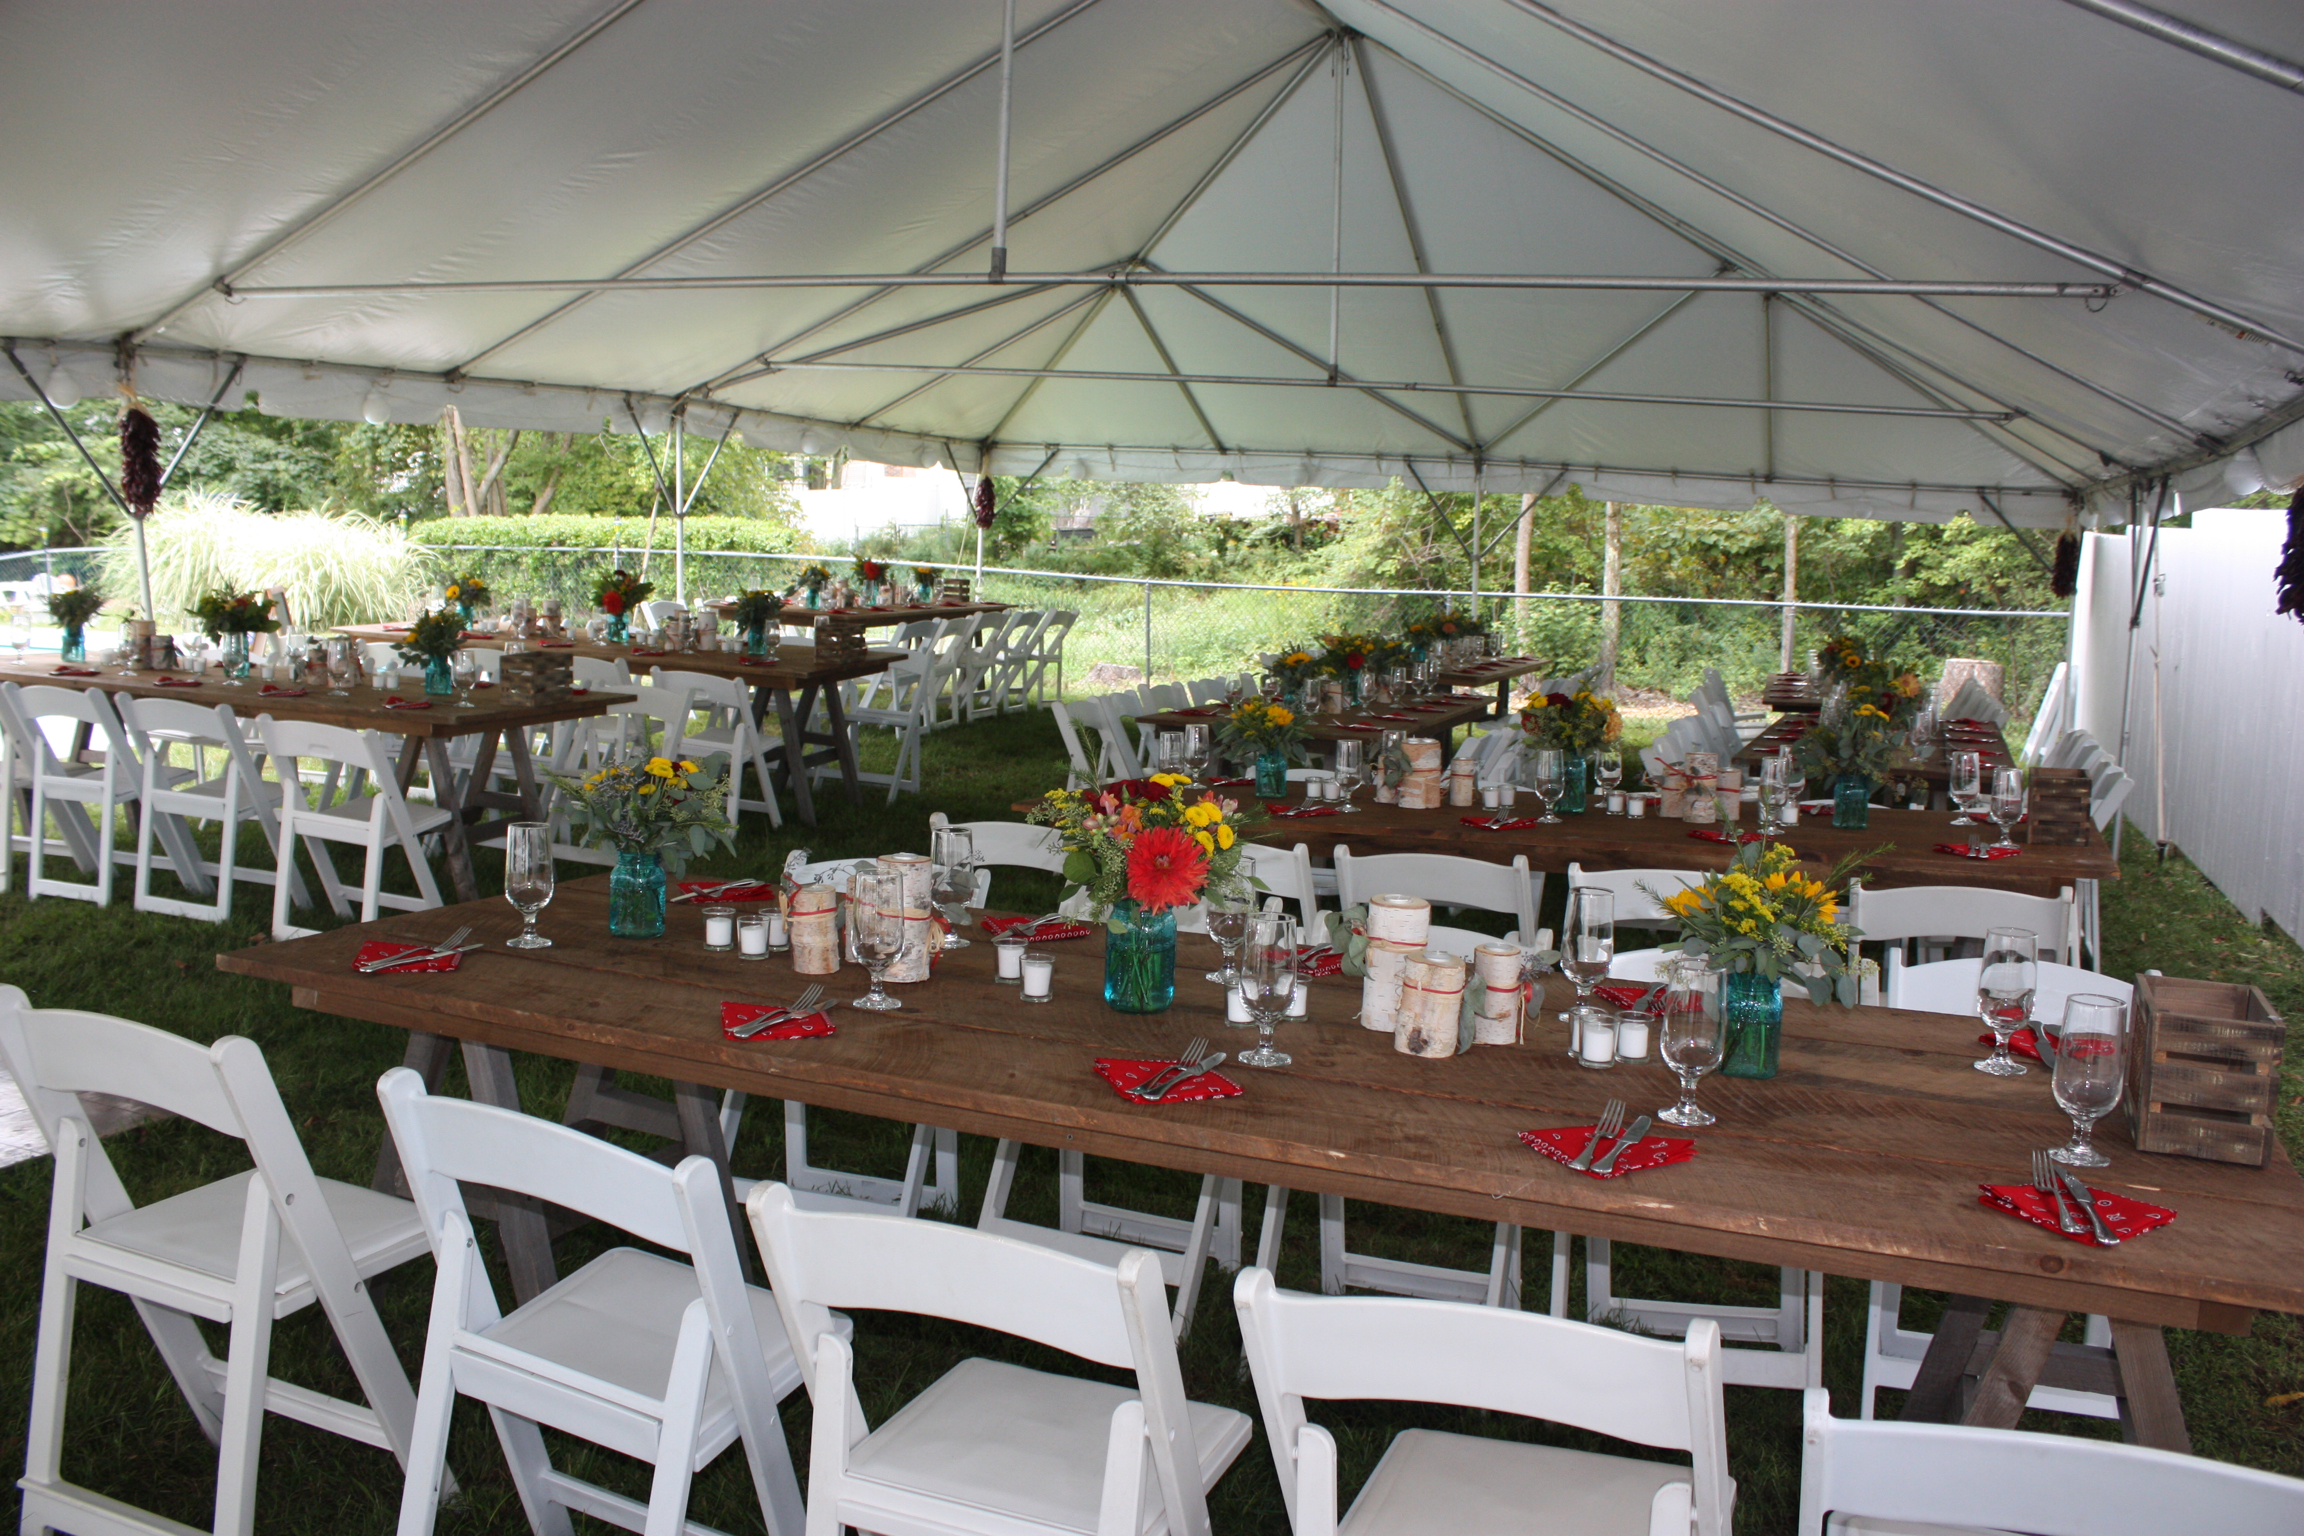 Red napkins, farm tables, white garden chairs and blue mason jars with sunflowers for this rustic backyard wedding - Pearl Weddings &amp; Events